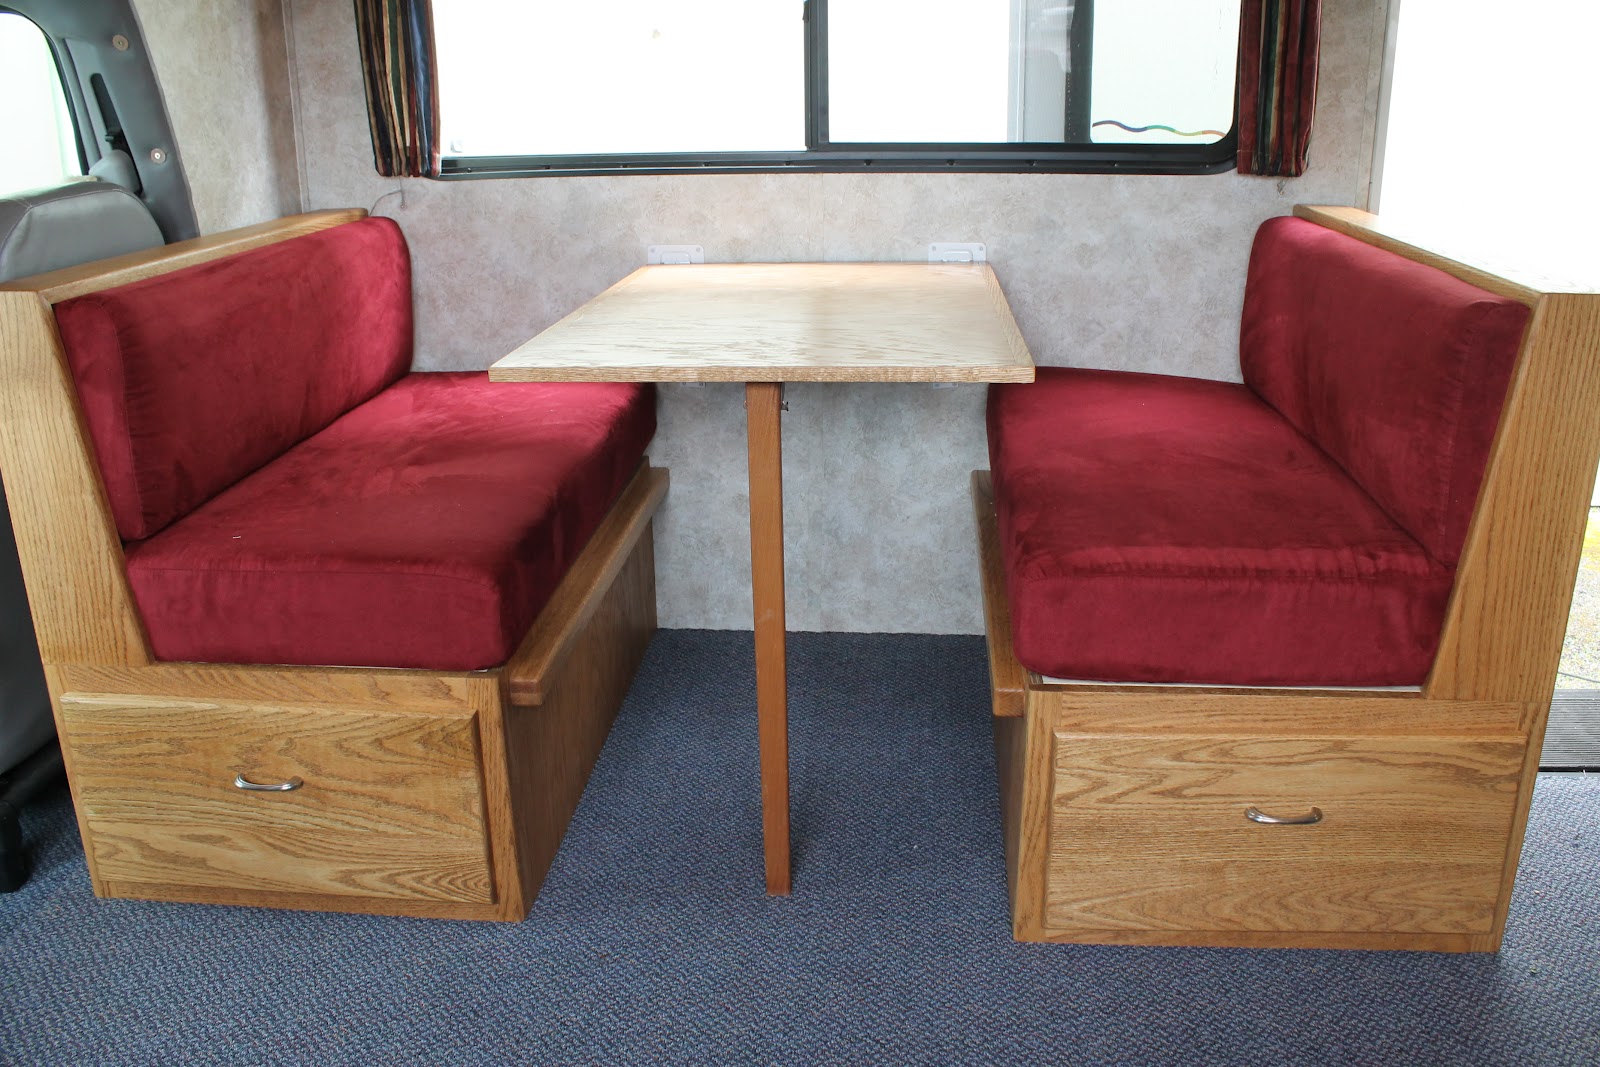 Free Download Countryside Interiors Transforming Rvs And Trailers